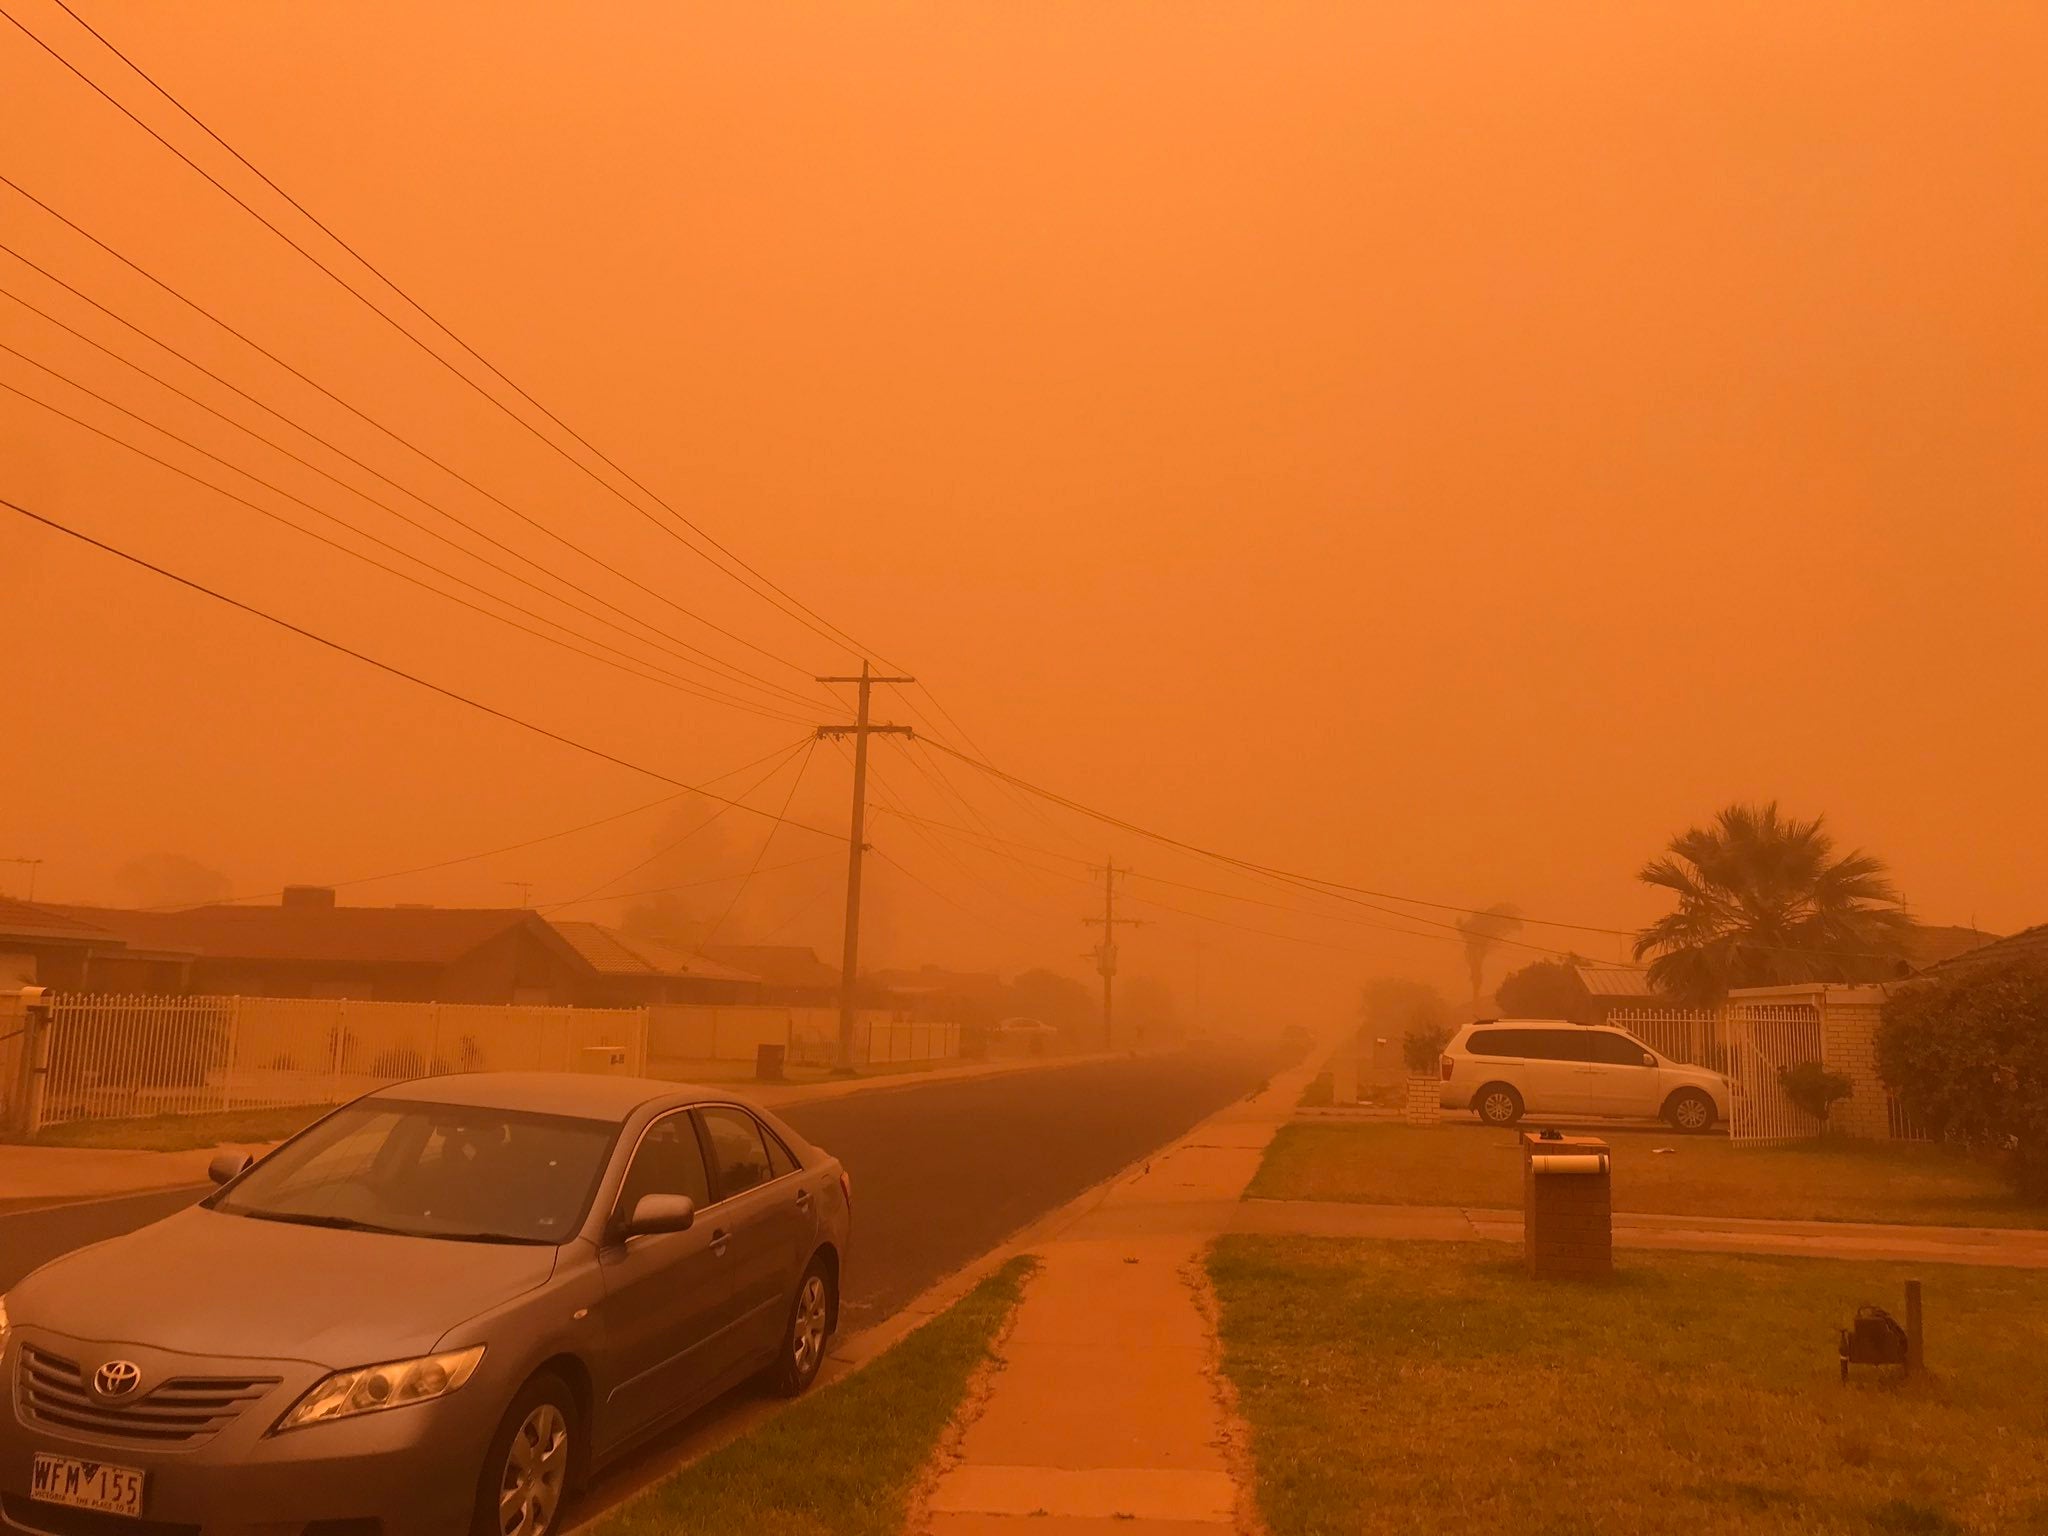 Skies in Australia Turn An Eerie Orange Due to Bushfires & Dust Storms, Code Red Declared in Areas - WORLD OF BUZZ